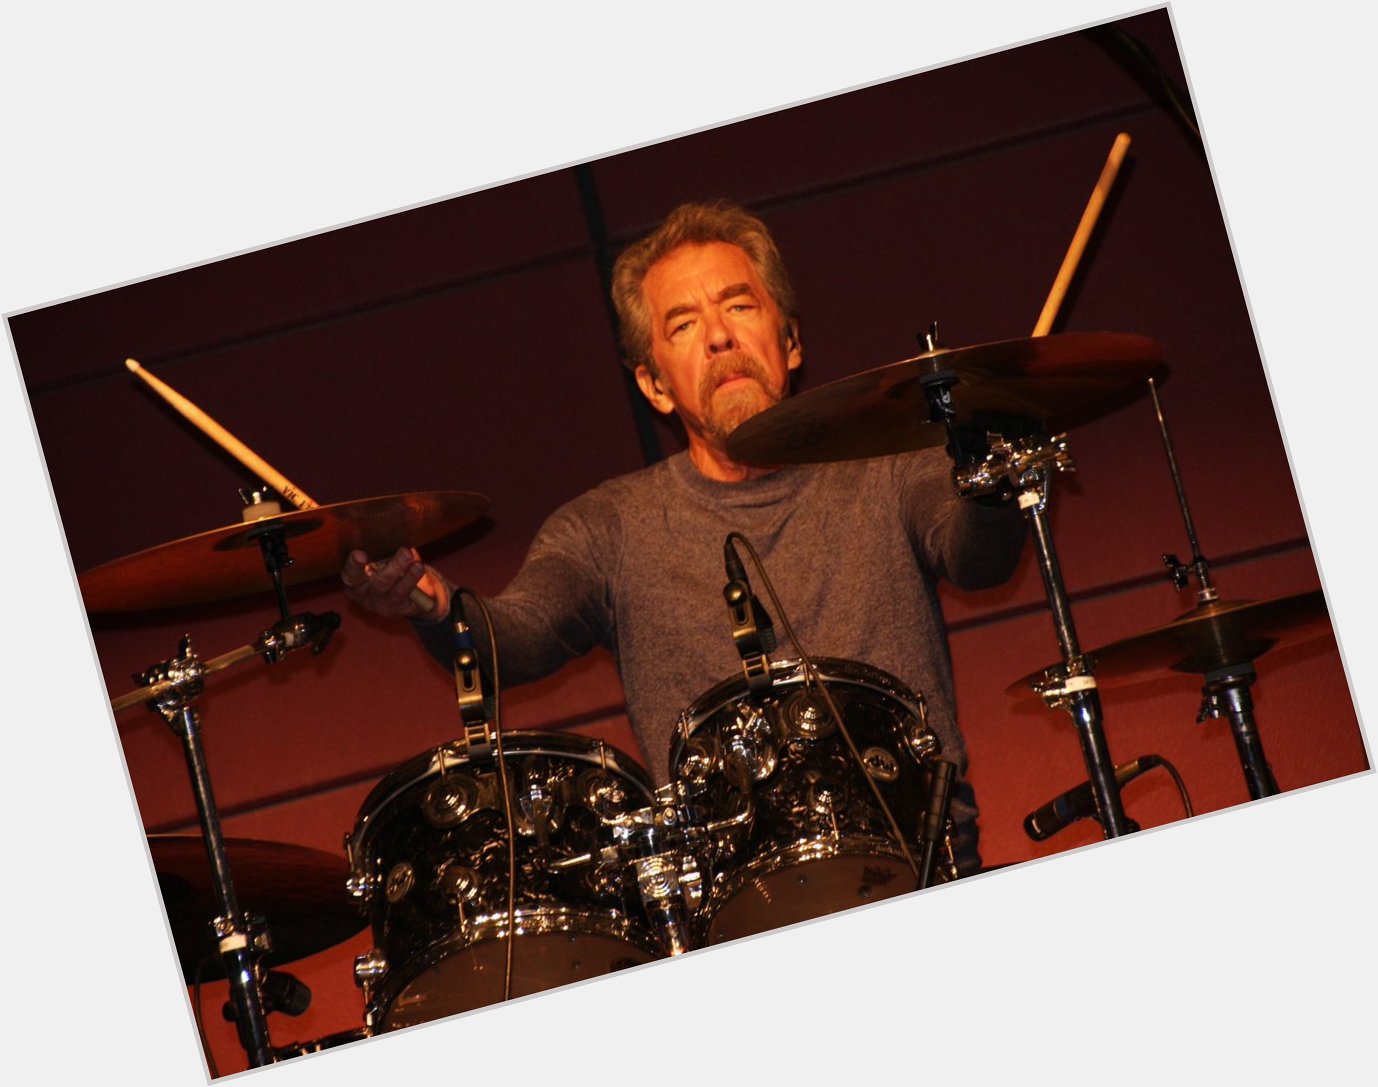 Happy 77th birthday to the drummer of Creedence Clearwater Revival, Doug Clifford 